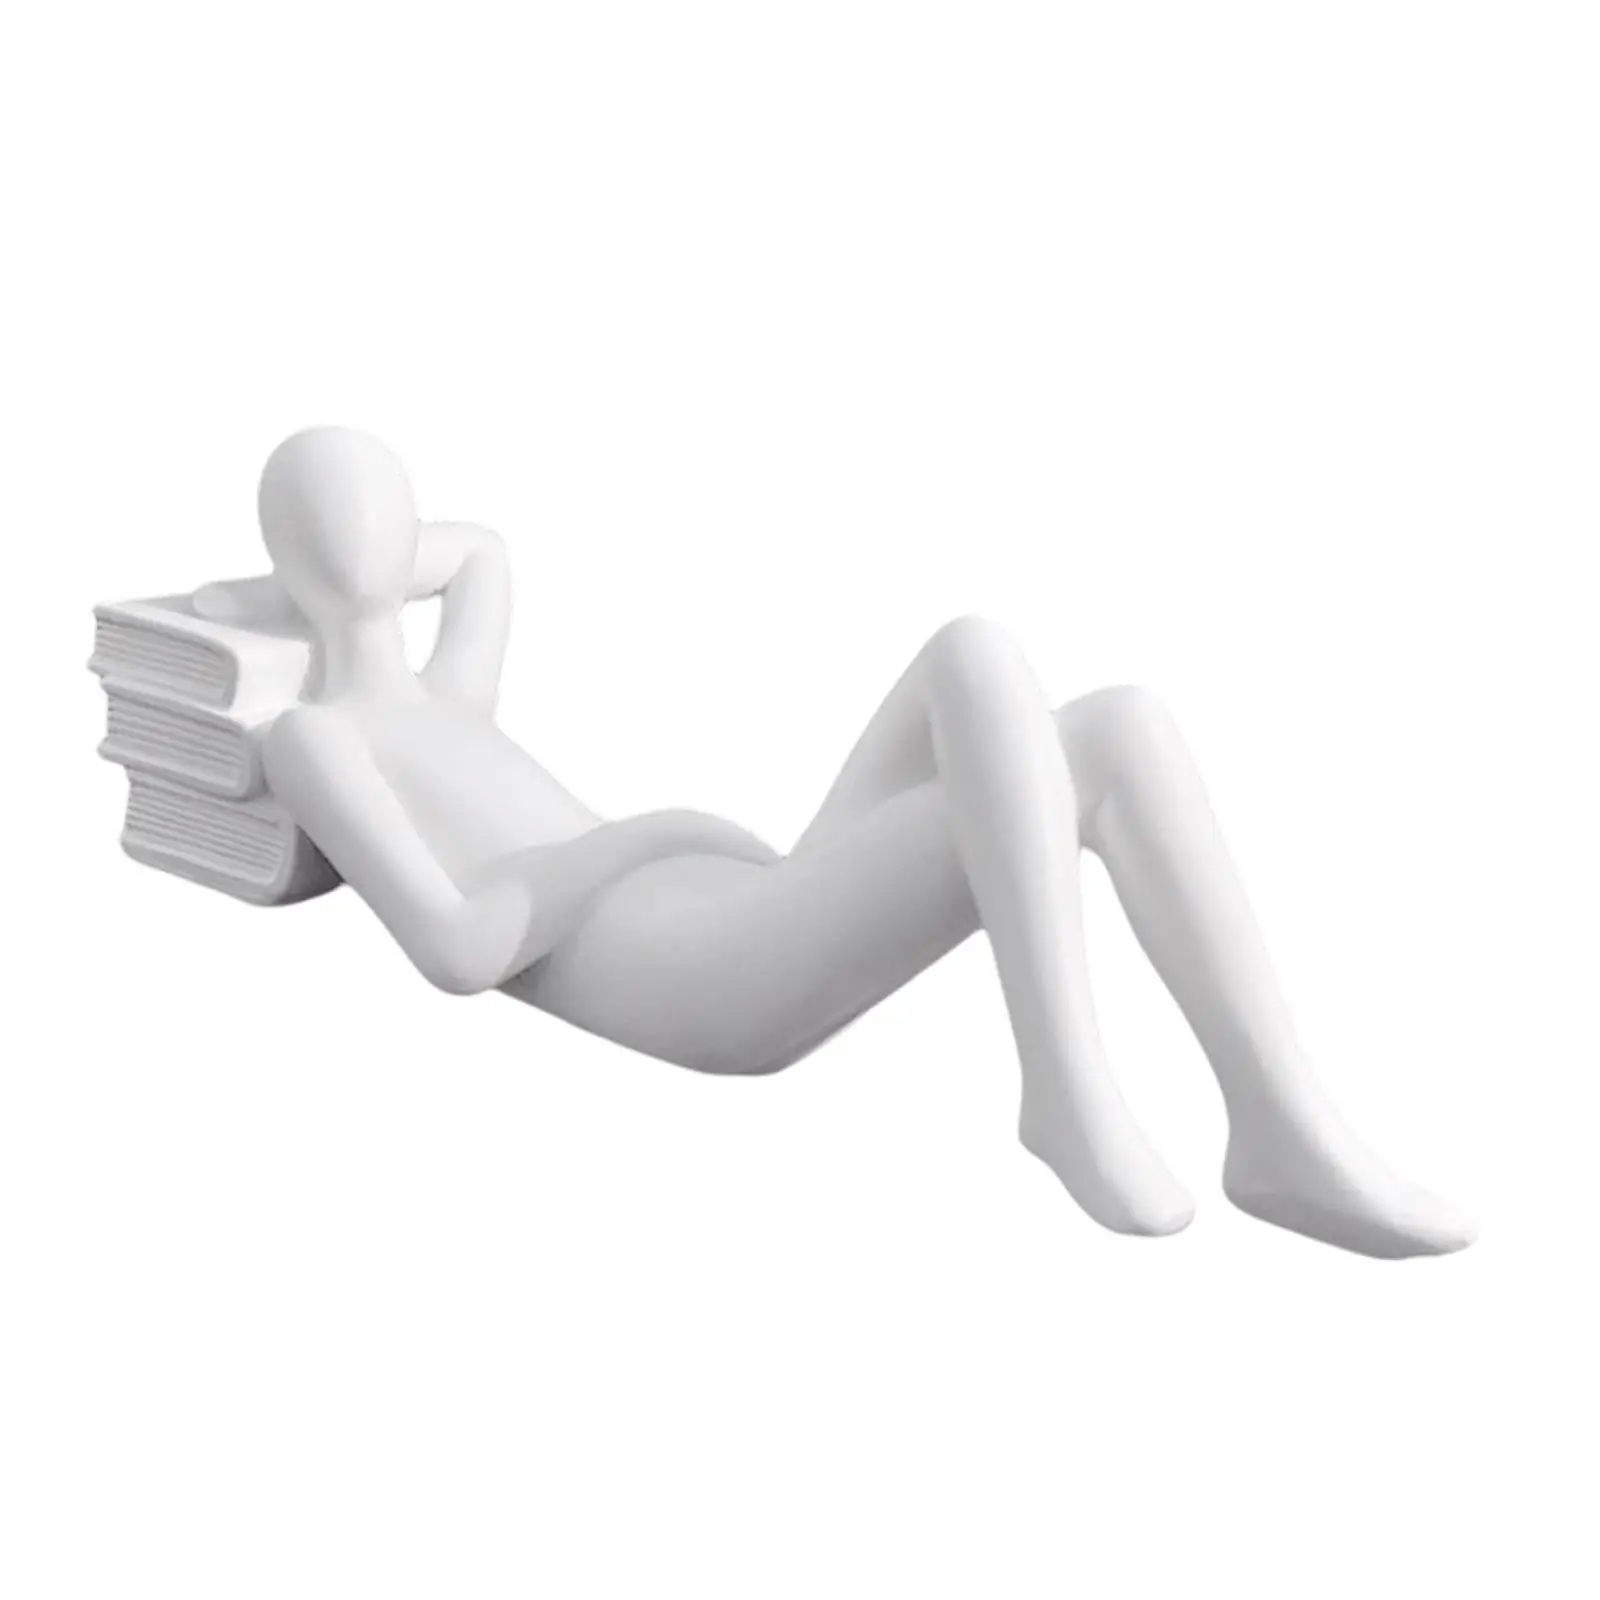 Thinker Statue Abstract Thinker Figurine Resin Thinker Sculpture Creative Artwork for Living Room Party Home Decor